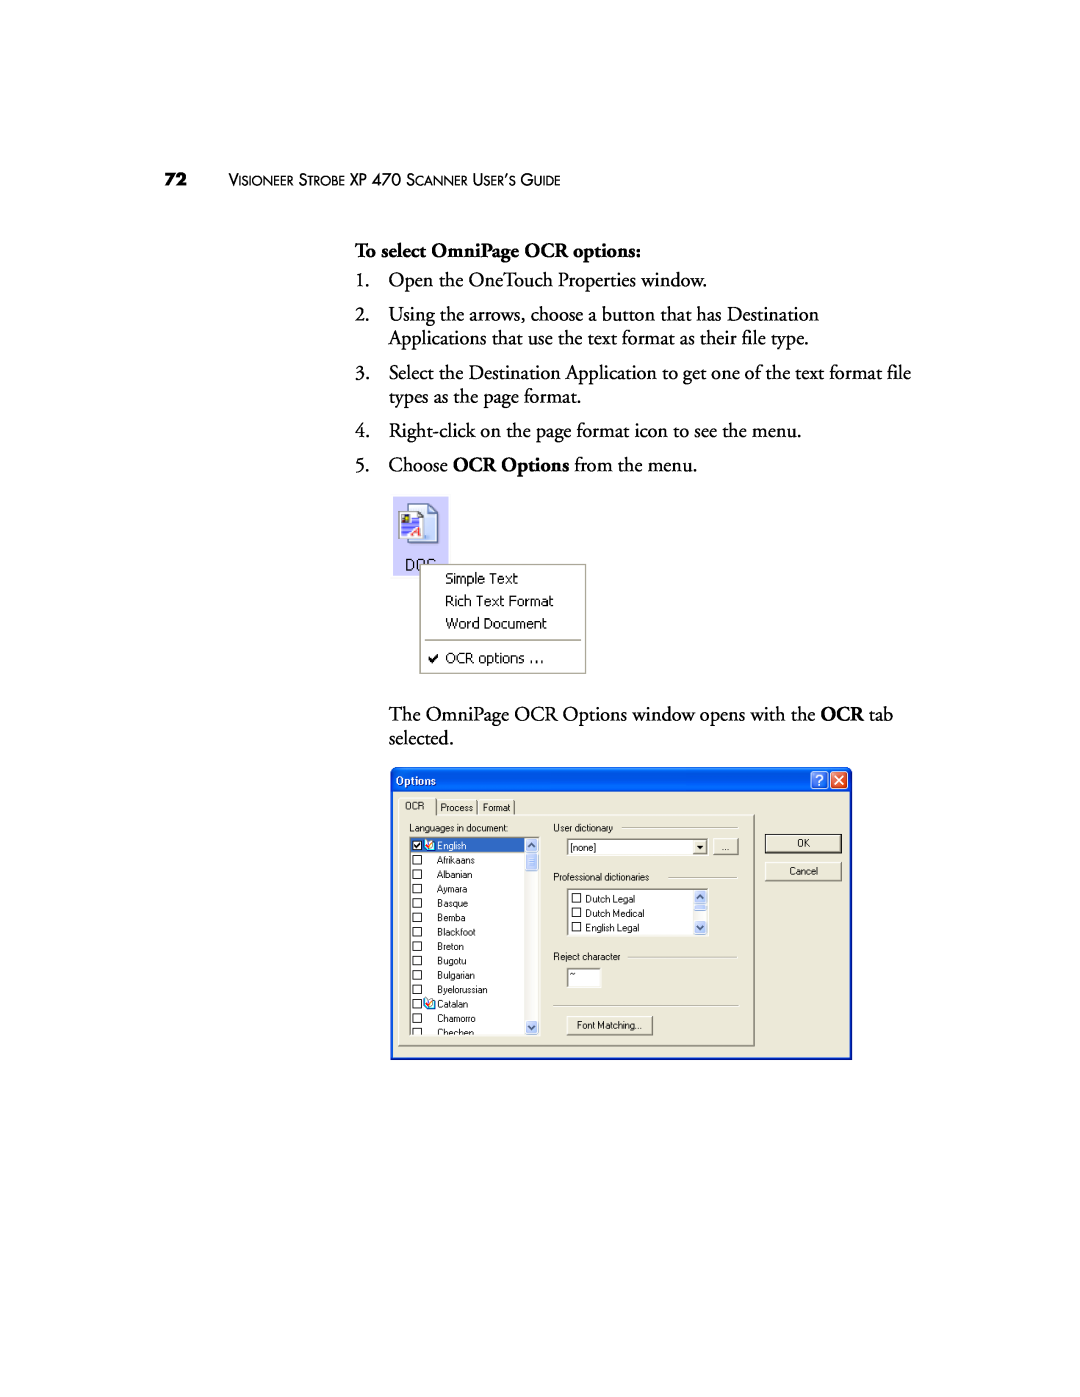 Visioneer manual To select OmniPage OCR options, VISIONEER STROBE XP 470 SCANNER USER’S GUIDE 